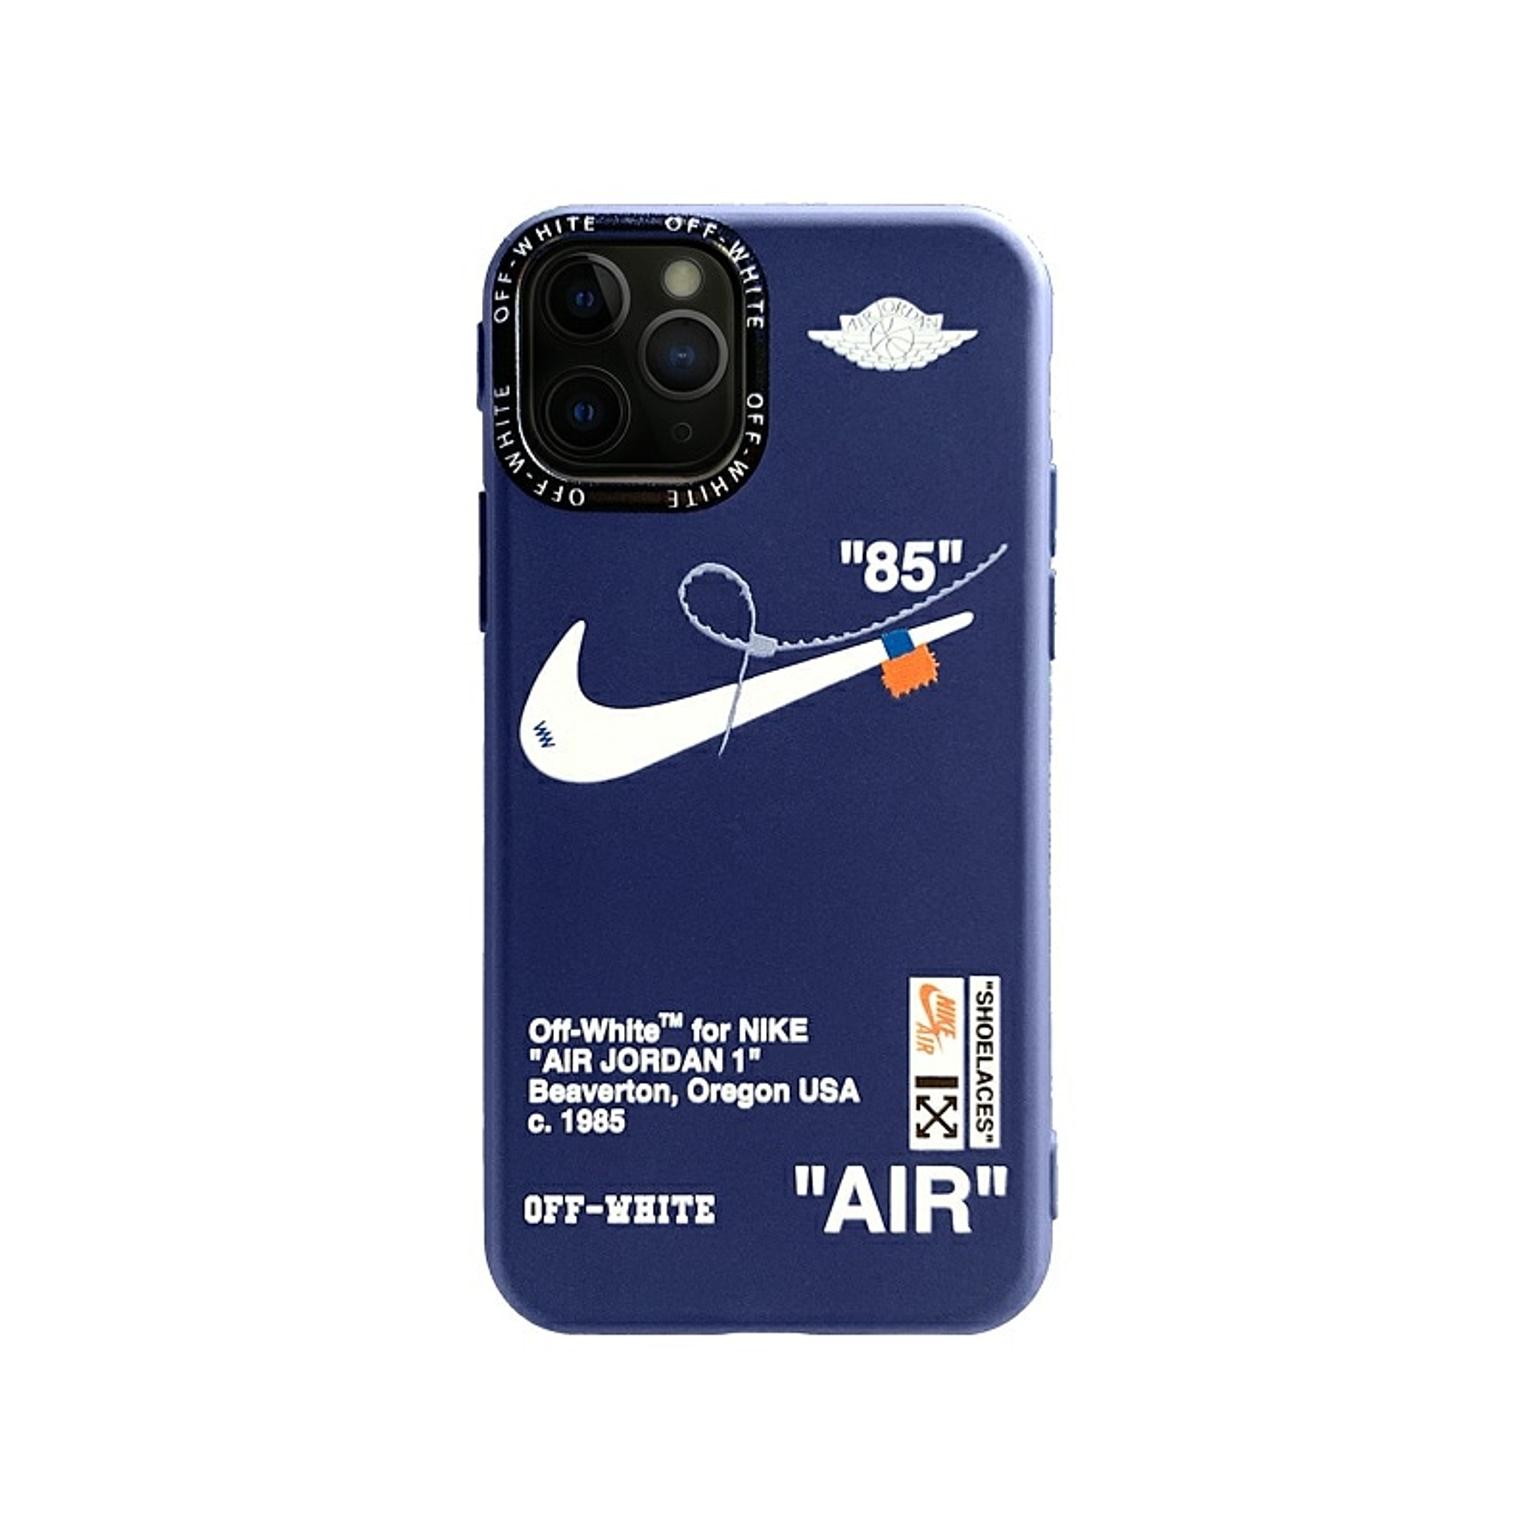 off white nike case iphone 11